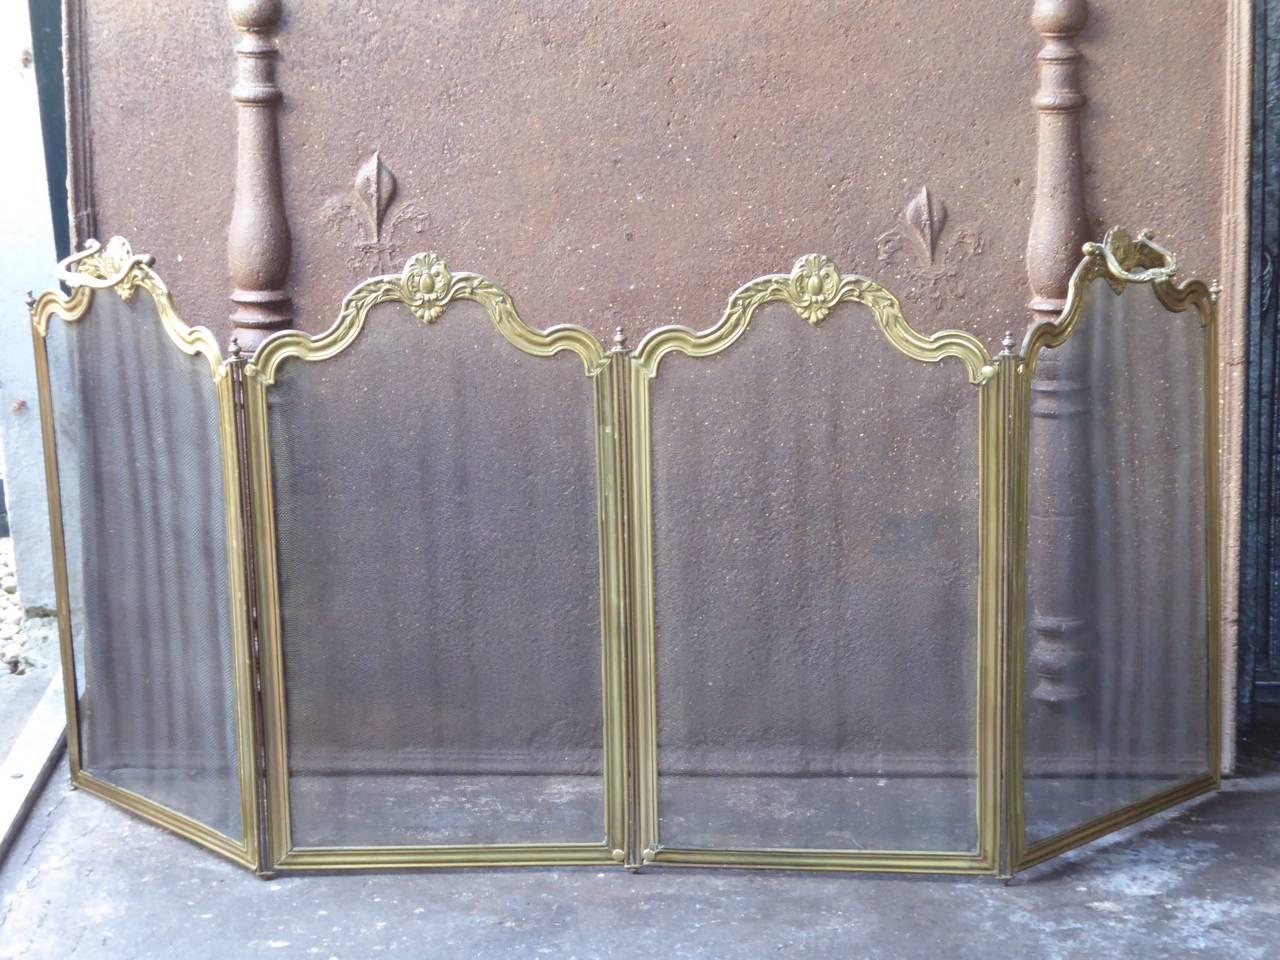 French Napoleon III fireplace screen made of iron and iron mesh.

We have a unique and specialized collection of antique and used fireplace accessories consisting of more than 1000 listings at 1stdibs. Amongst others we always have 300+ firebacks,